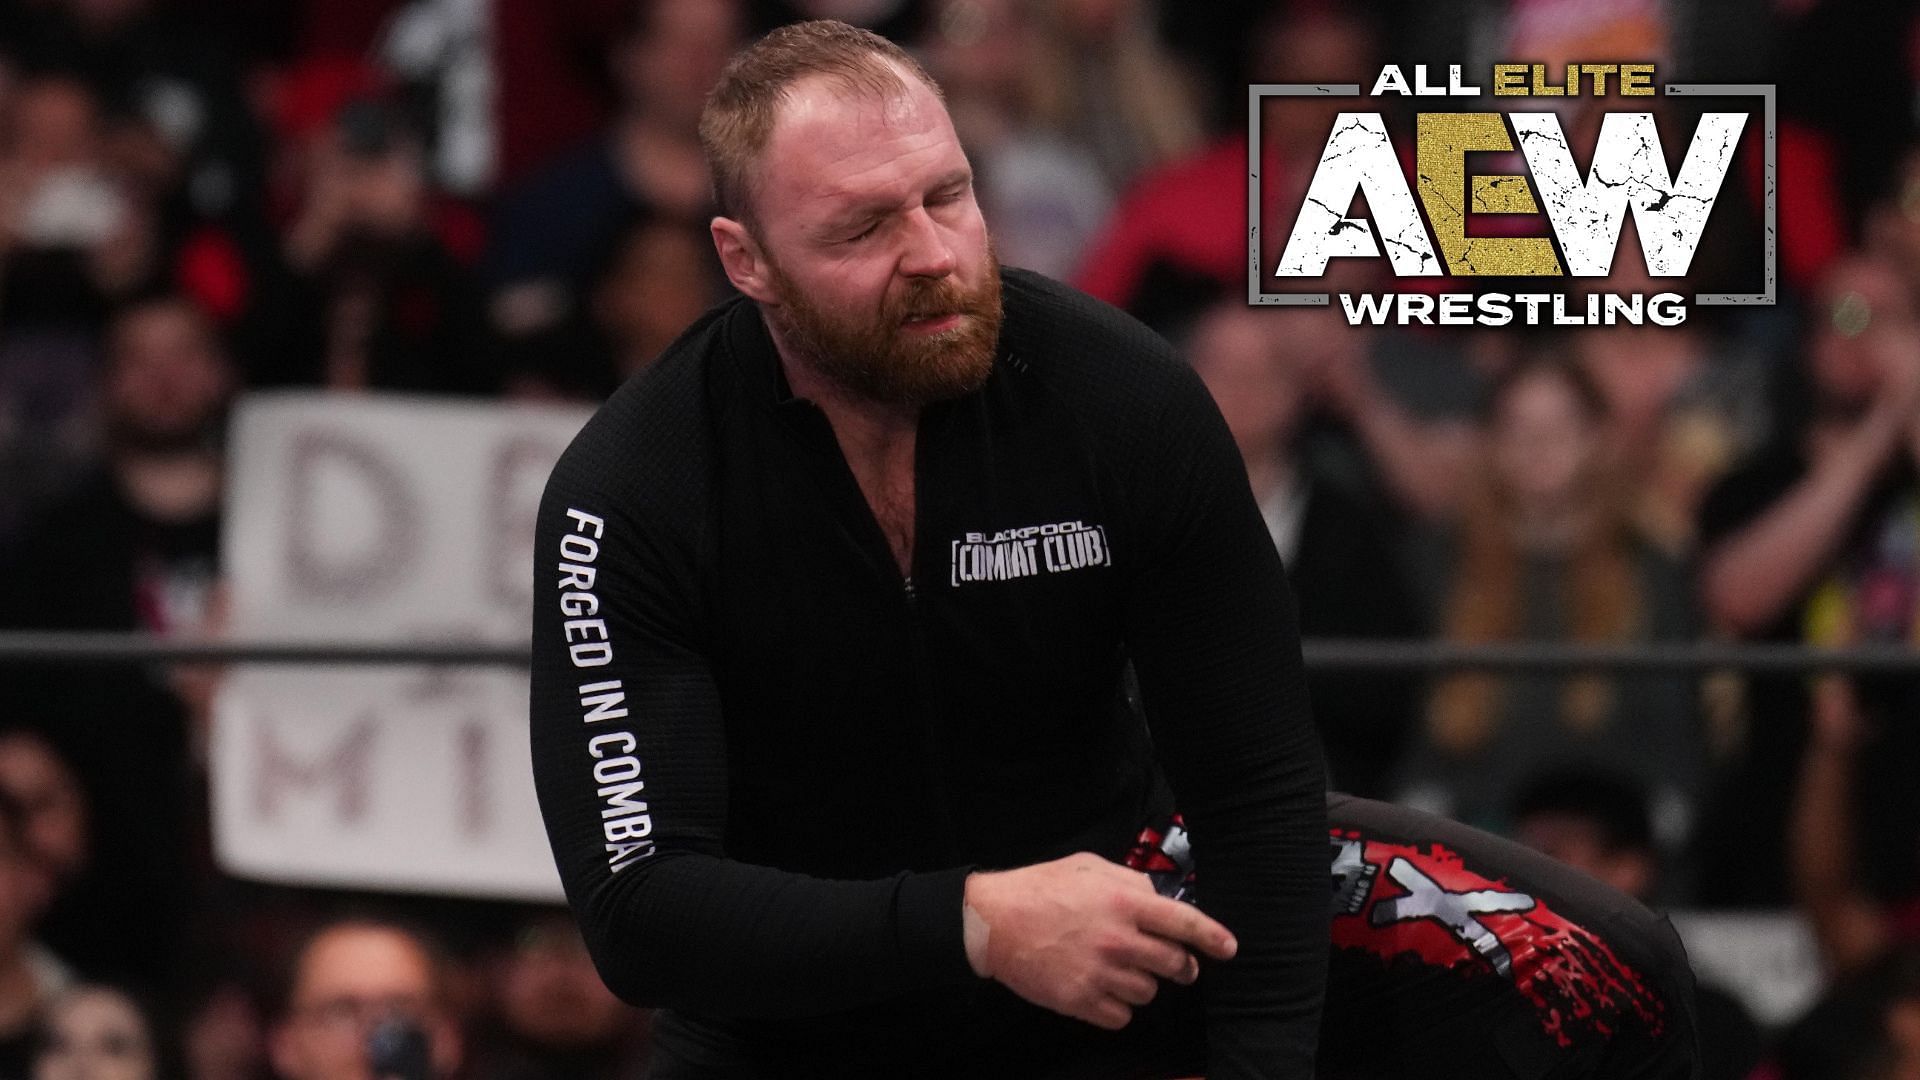 Jon Moxley is set to compete in a non-AEW event soon